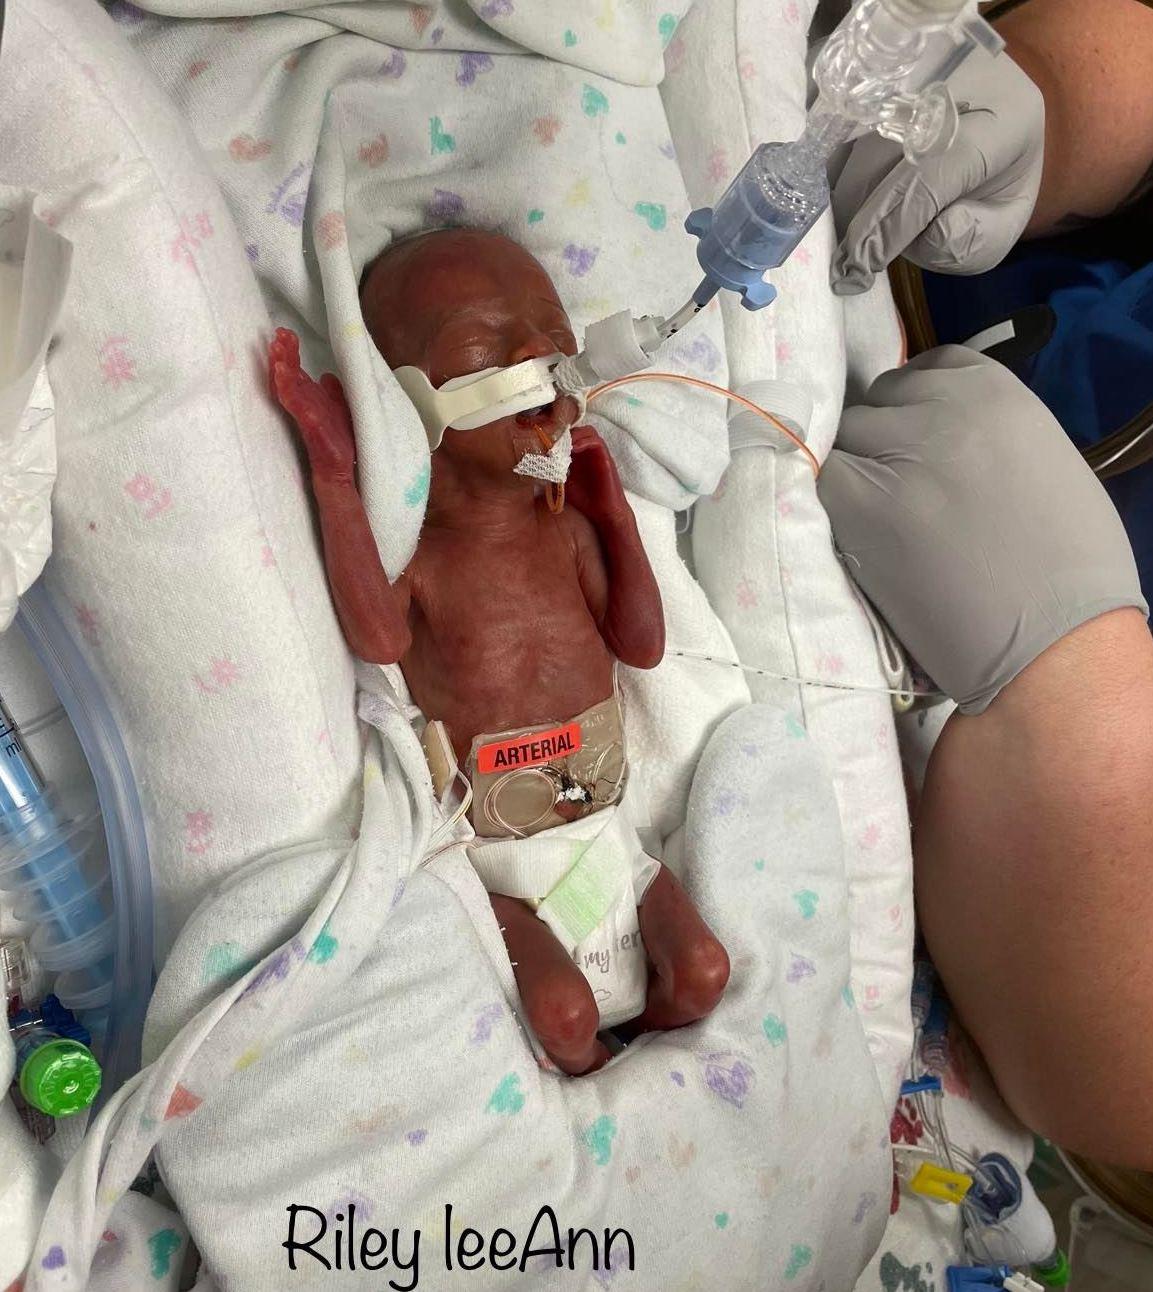 Riley was born at 22 weeks and 4 days' gestation. (Courtesy of <a href="https://www.facebook.com/megan.kommers.9">Megan Phipps</a>)